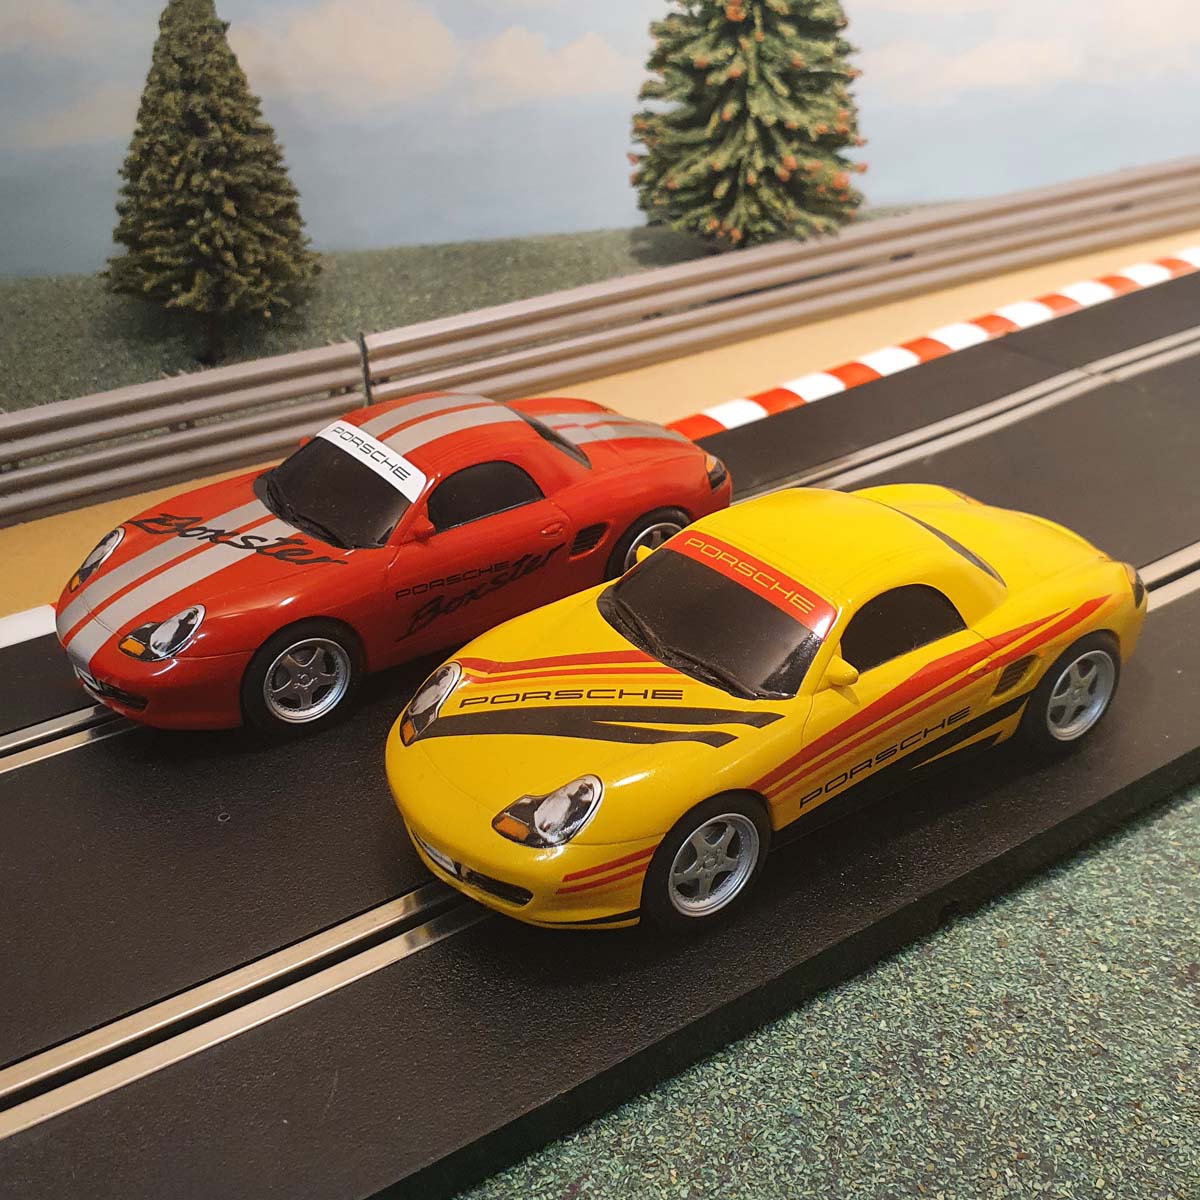 Scalextric 1:32 Pair Of Digital Cars - Red & Yellow Porsche Boxsters